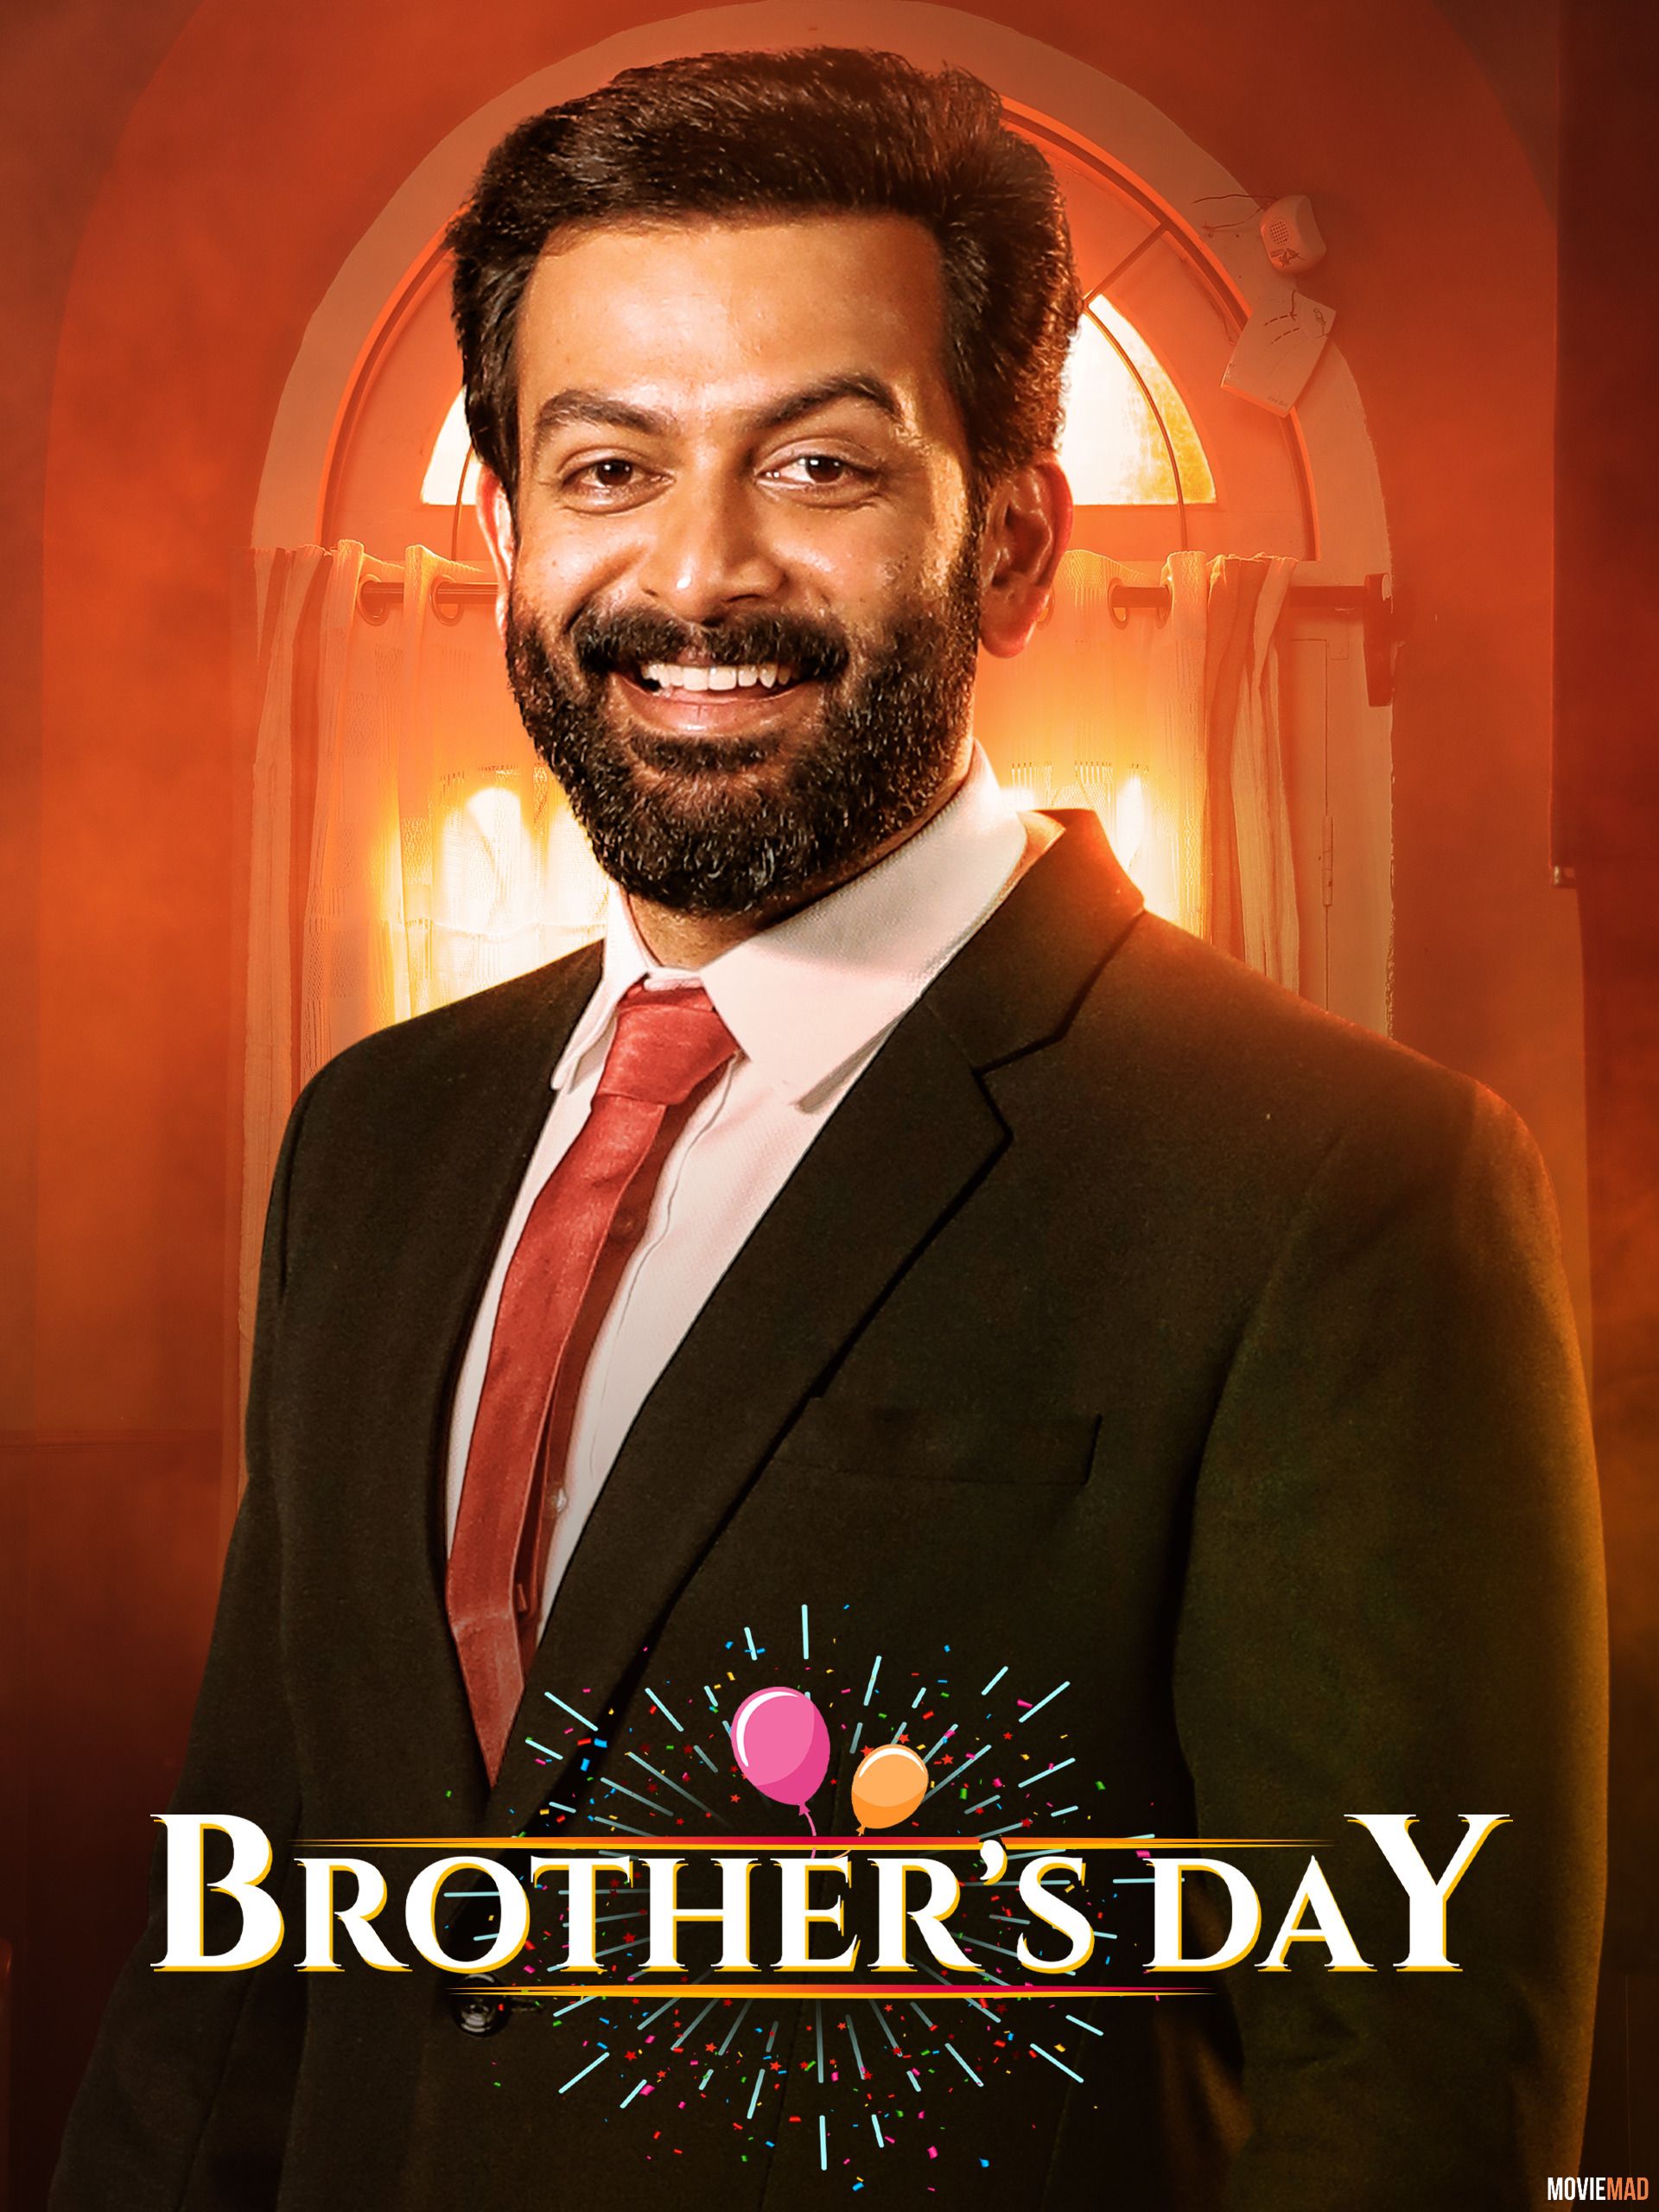 Brothers Day (2019) UNCUT Hindi Dubbed ORG HDRip Full Movie 720p 480p